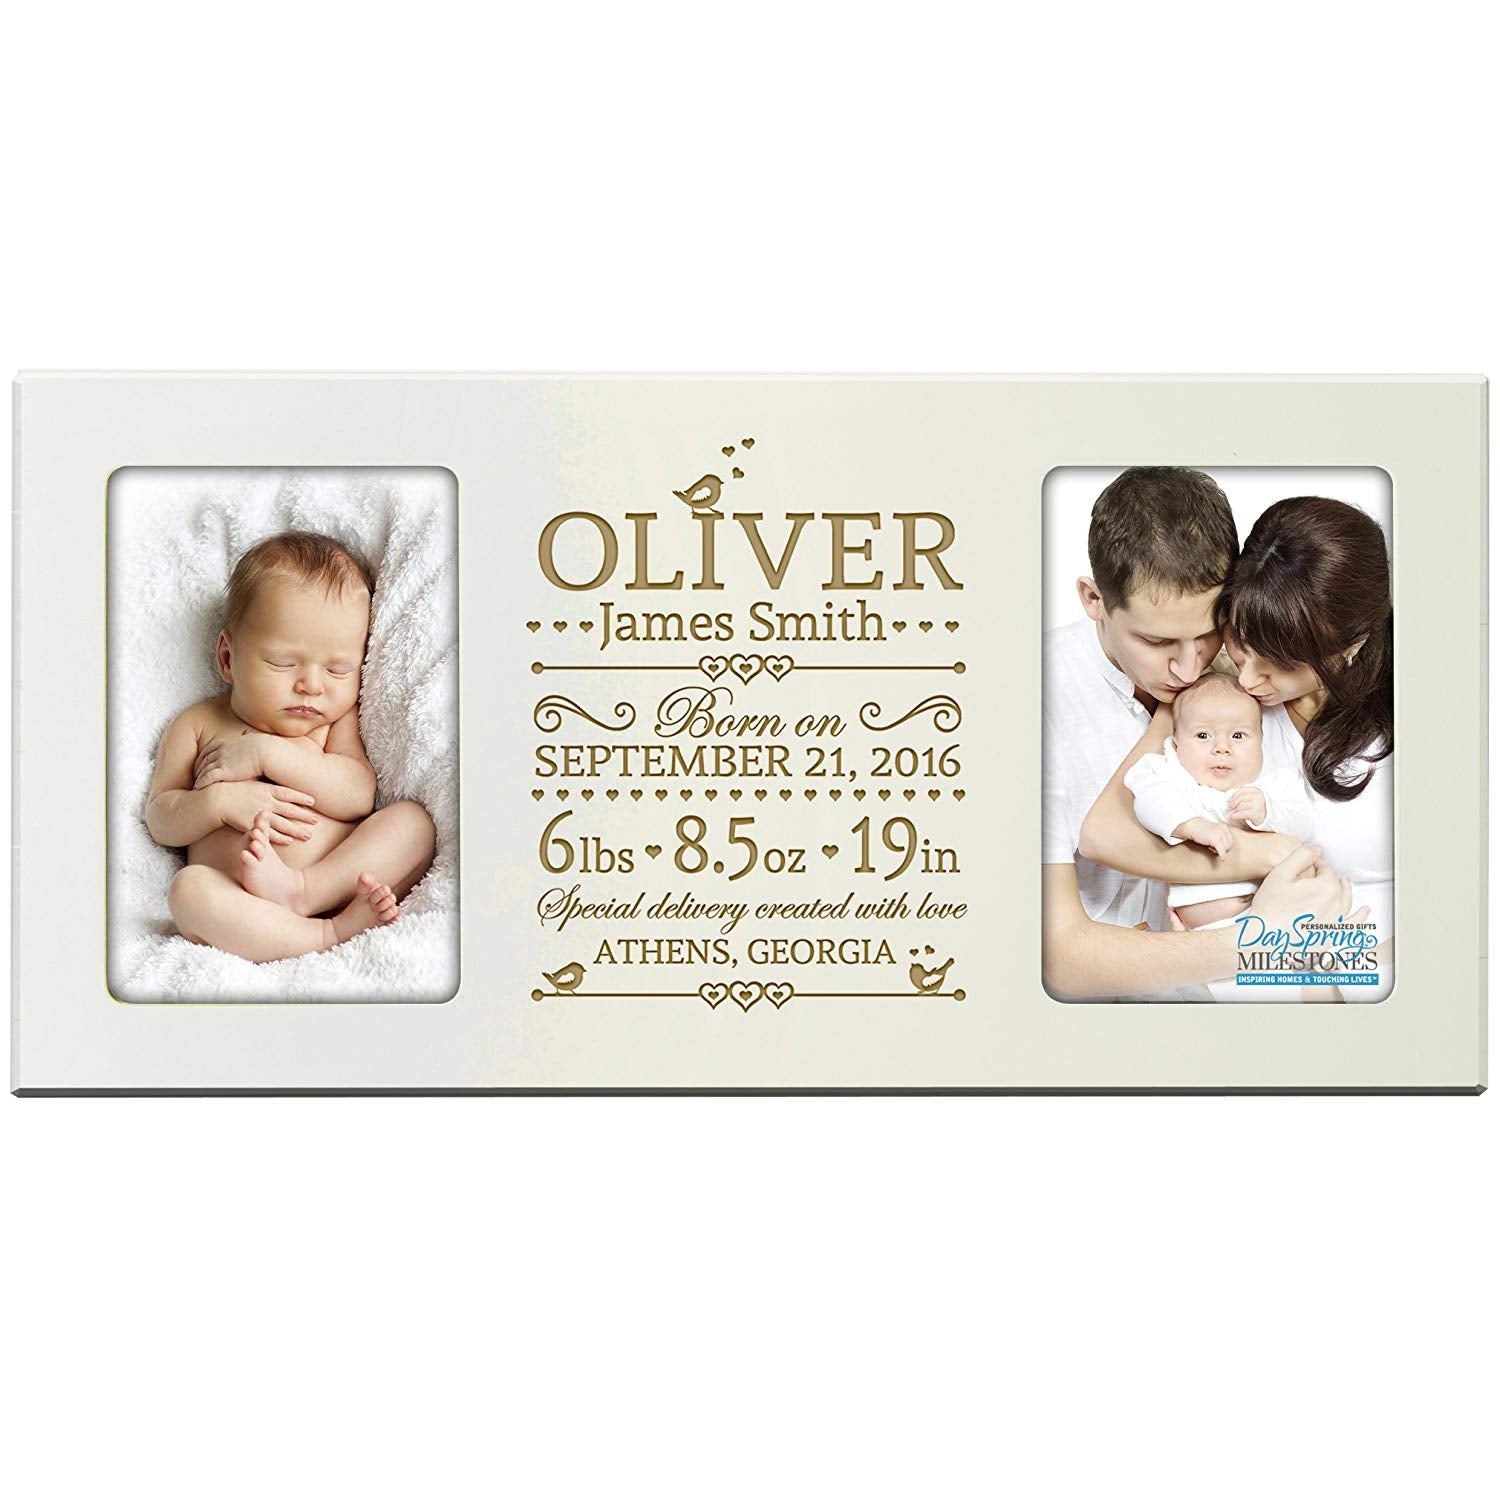 Personalized Baby Announcement Double Photo Frame - Special Delivery - LifeSong Milestones